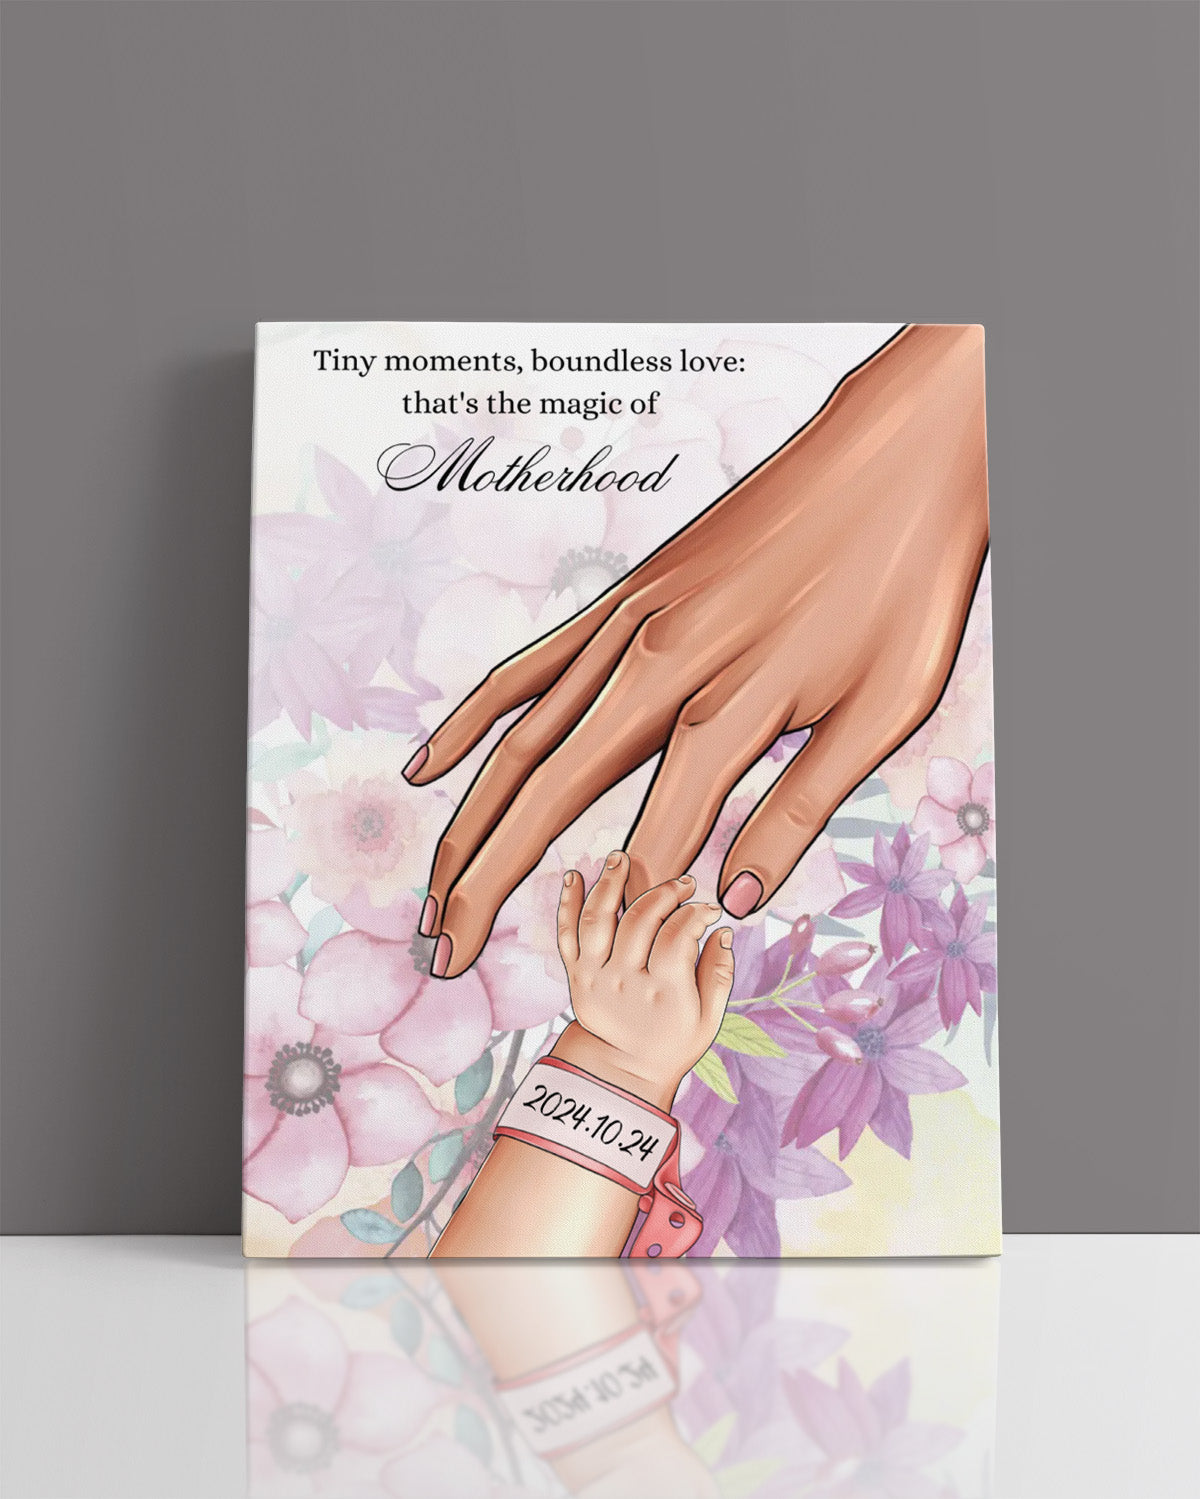 Mother and Child hands with multiple phrase to choose from - Customizable Mom Wall Art Canvas